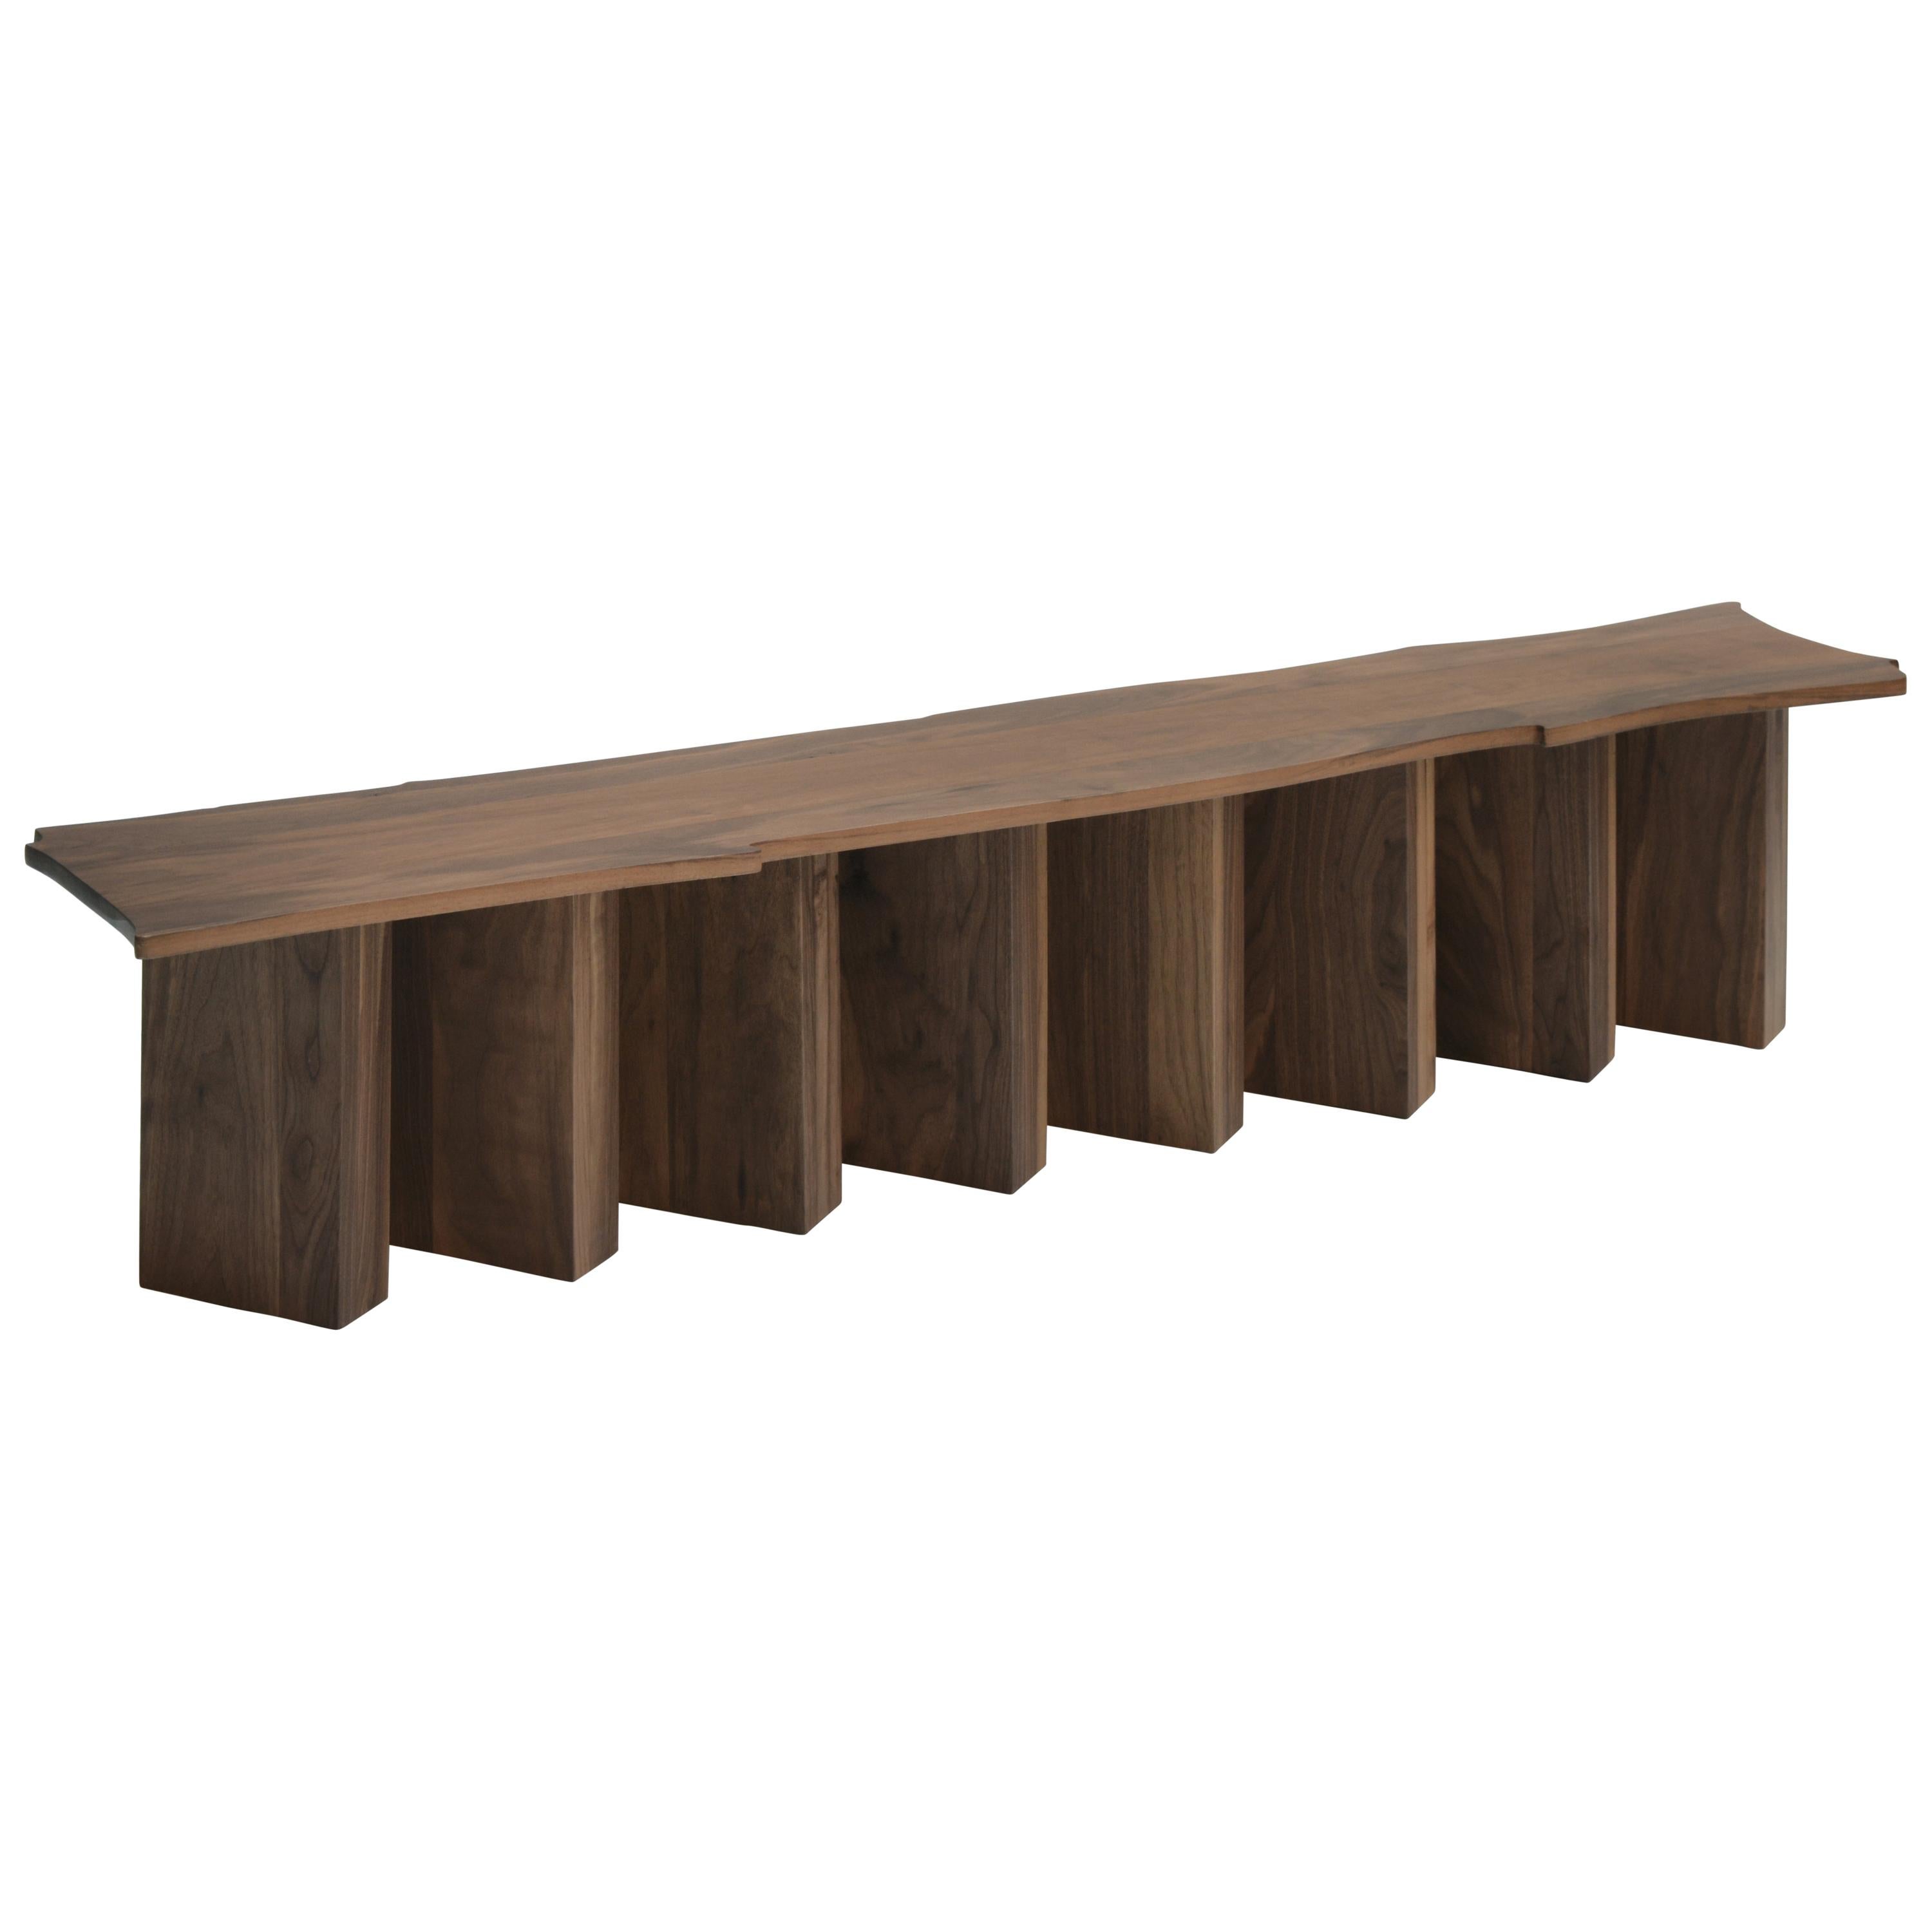 Dragon Bench Contemporary Bench in Black Walnut For Sale